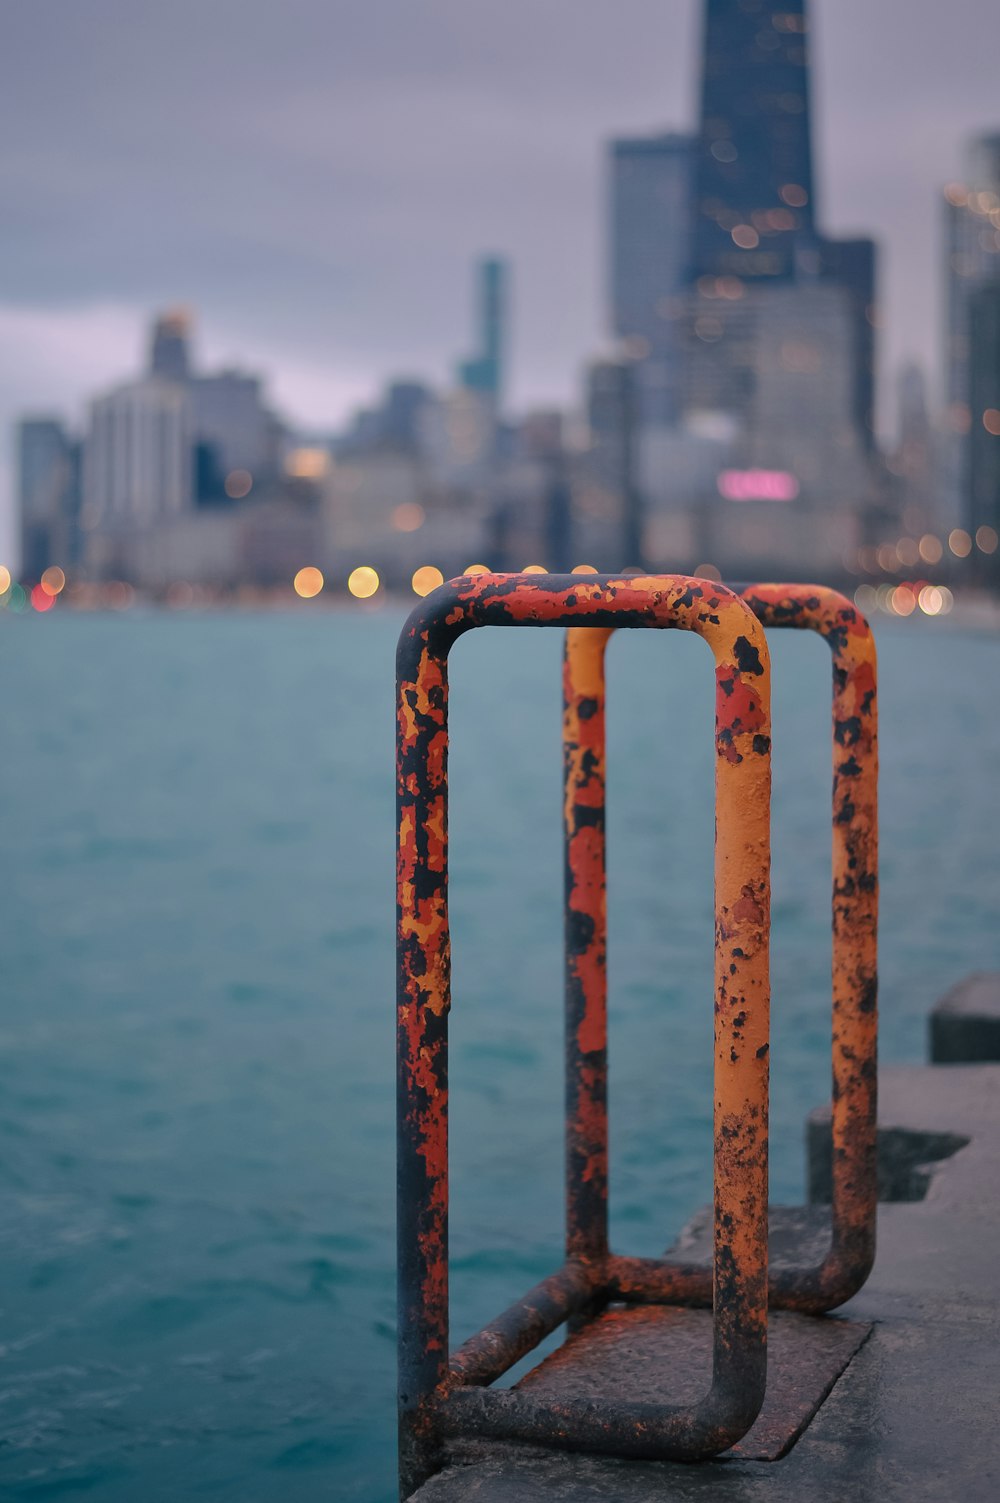 a rusted metal railing near a body of water with a city in the background